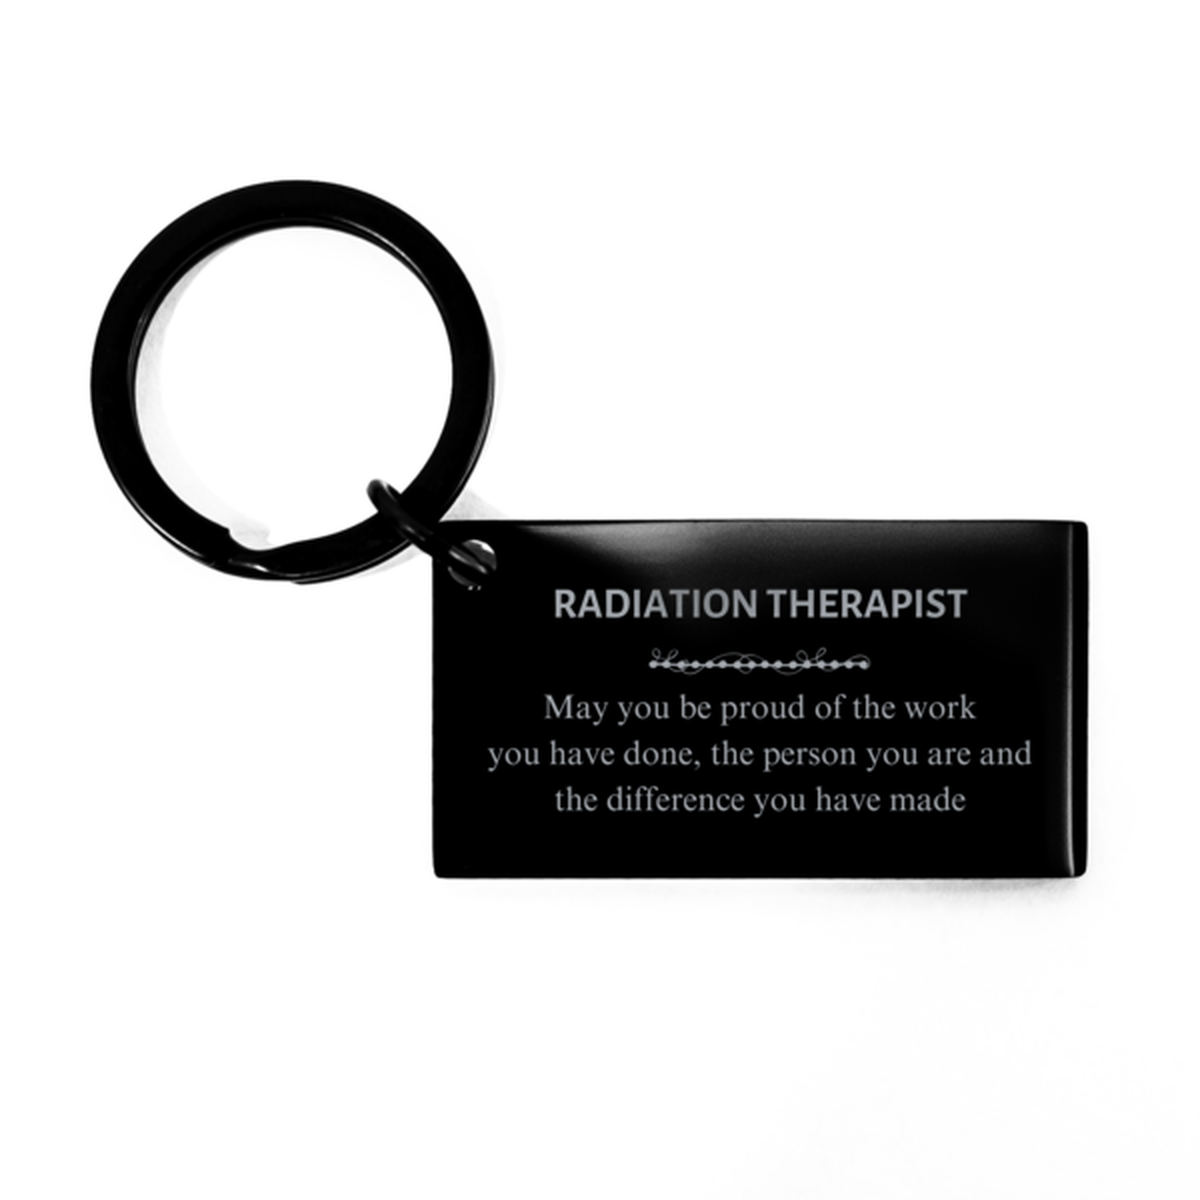 Supervisor May you be proud of the work you have done, Retirement Radiation Therapist Keychain for Colleague Appreciation Gifts Amazing for Radiation Therapist